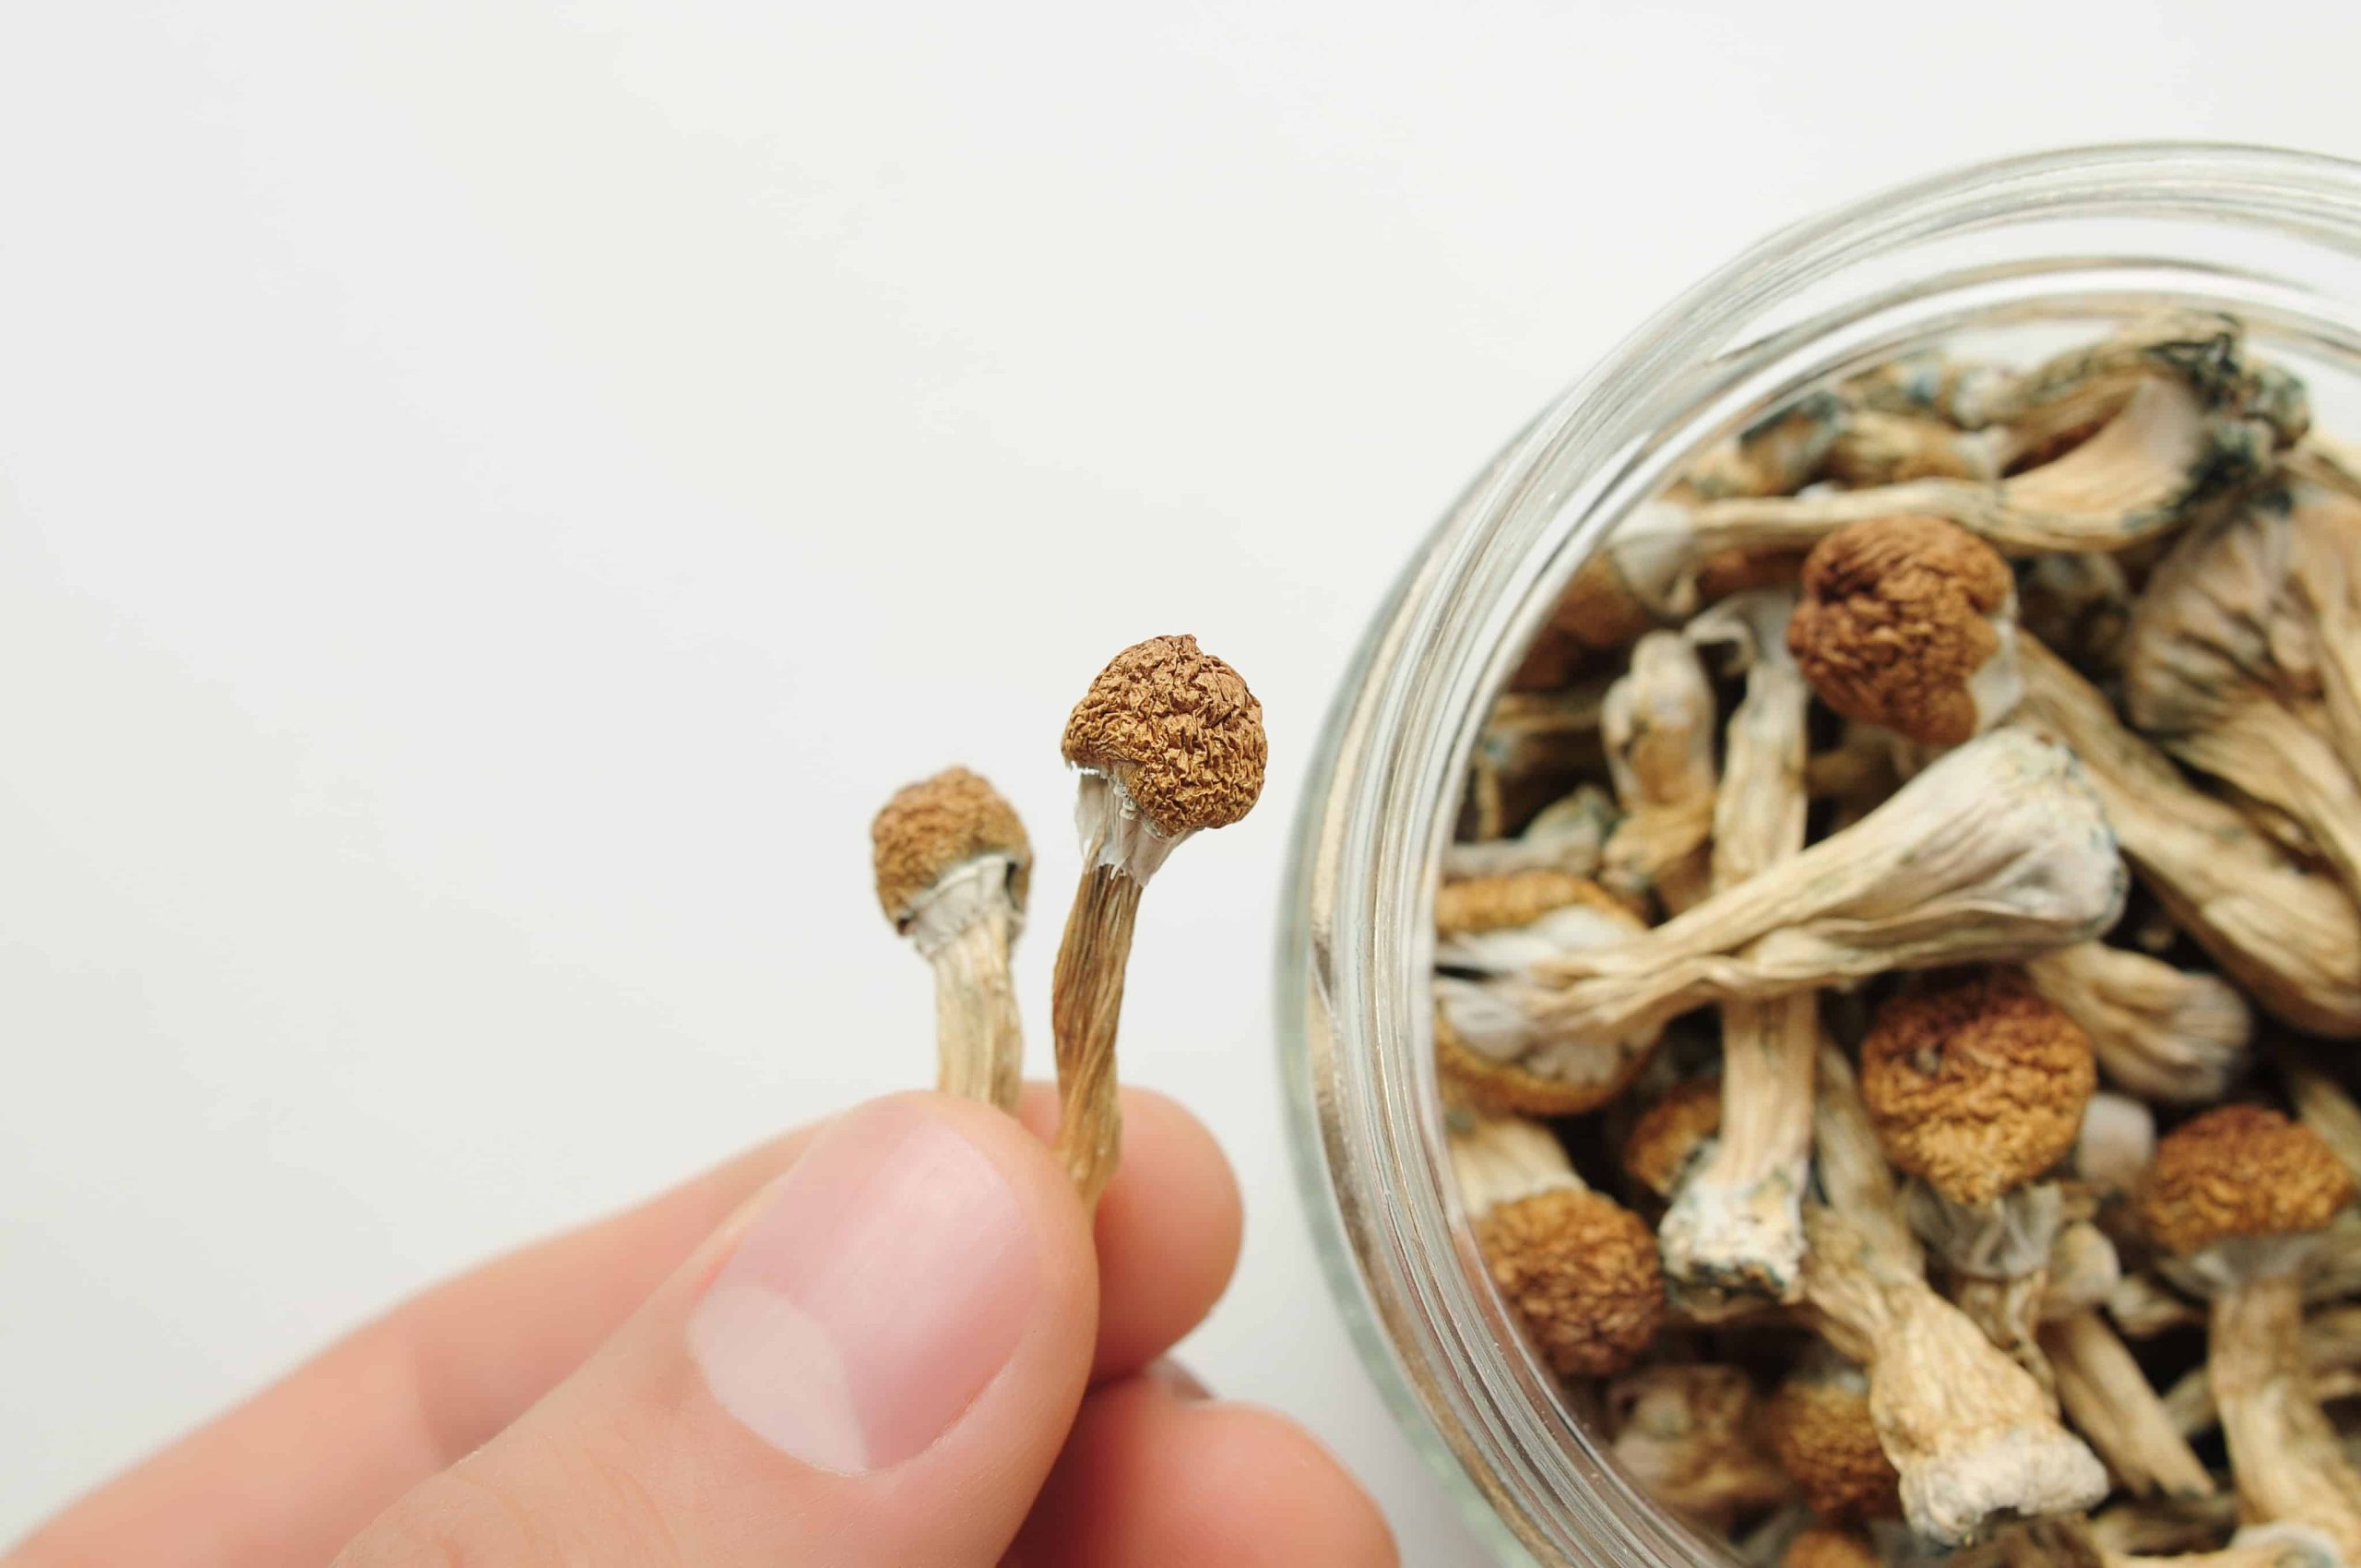 New Study Suggests Expectations May Drive Effects of Microdosing Psilocybin